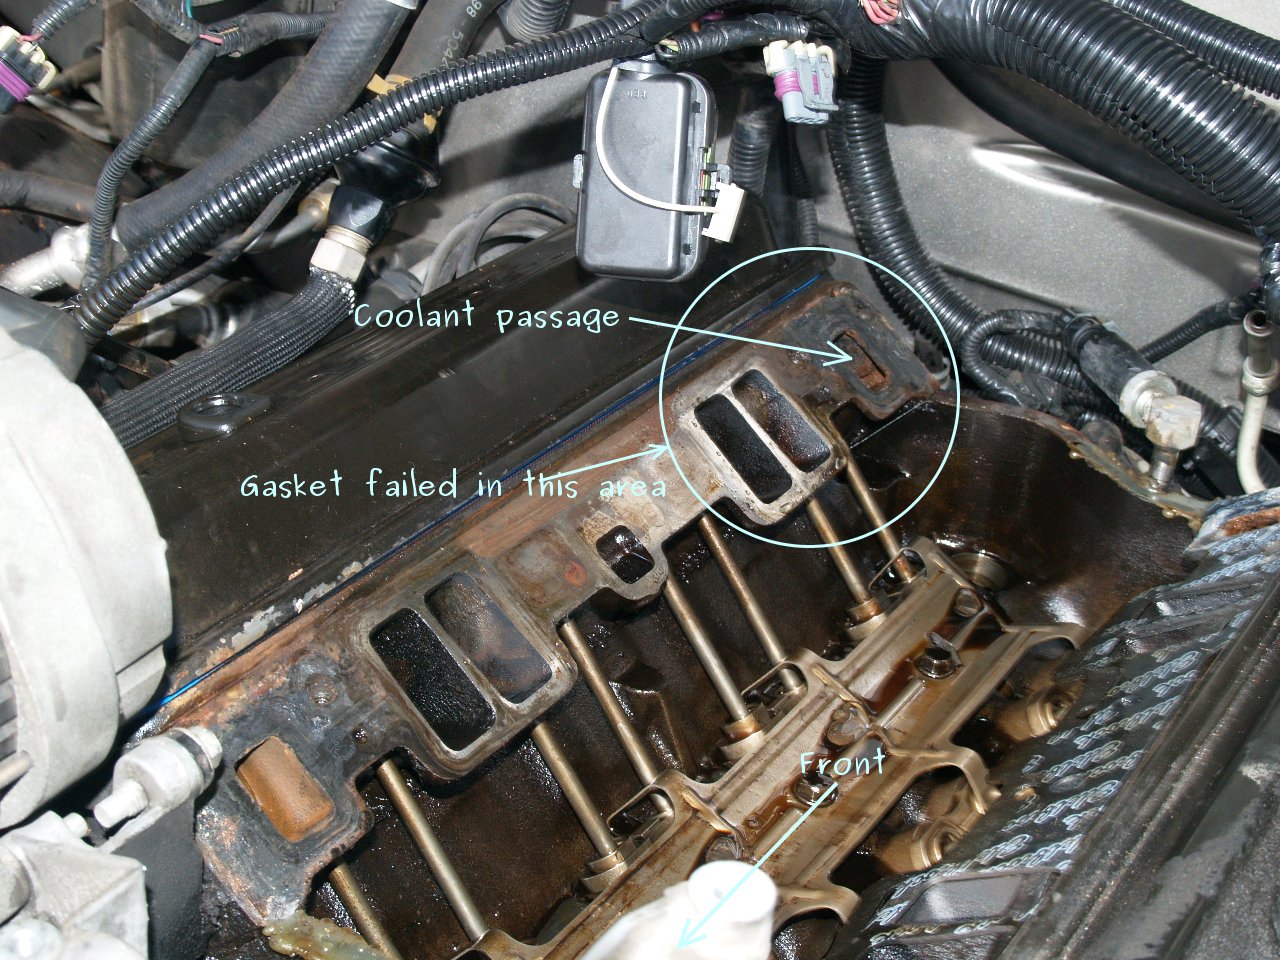 See P0B2A in engine